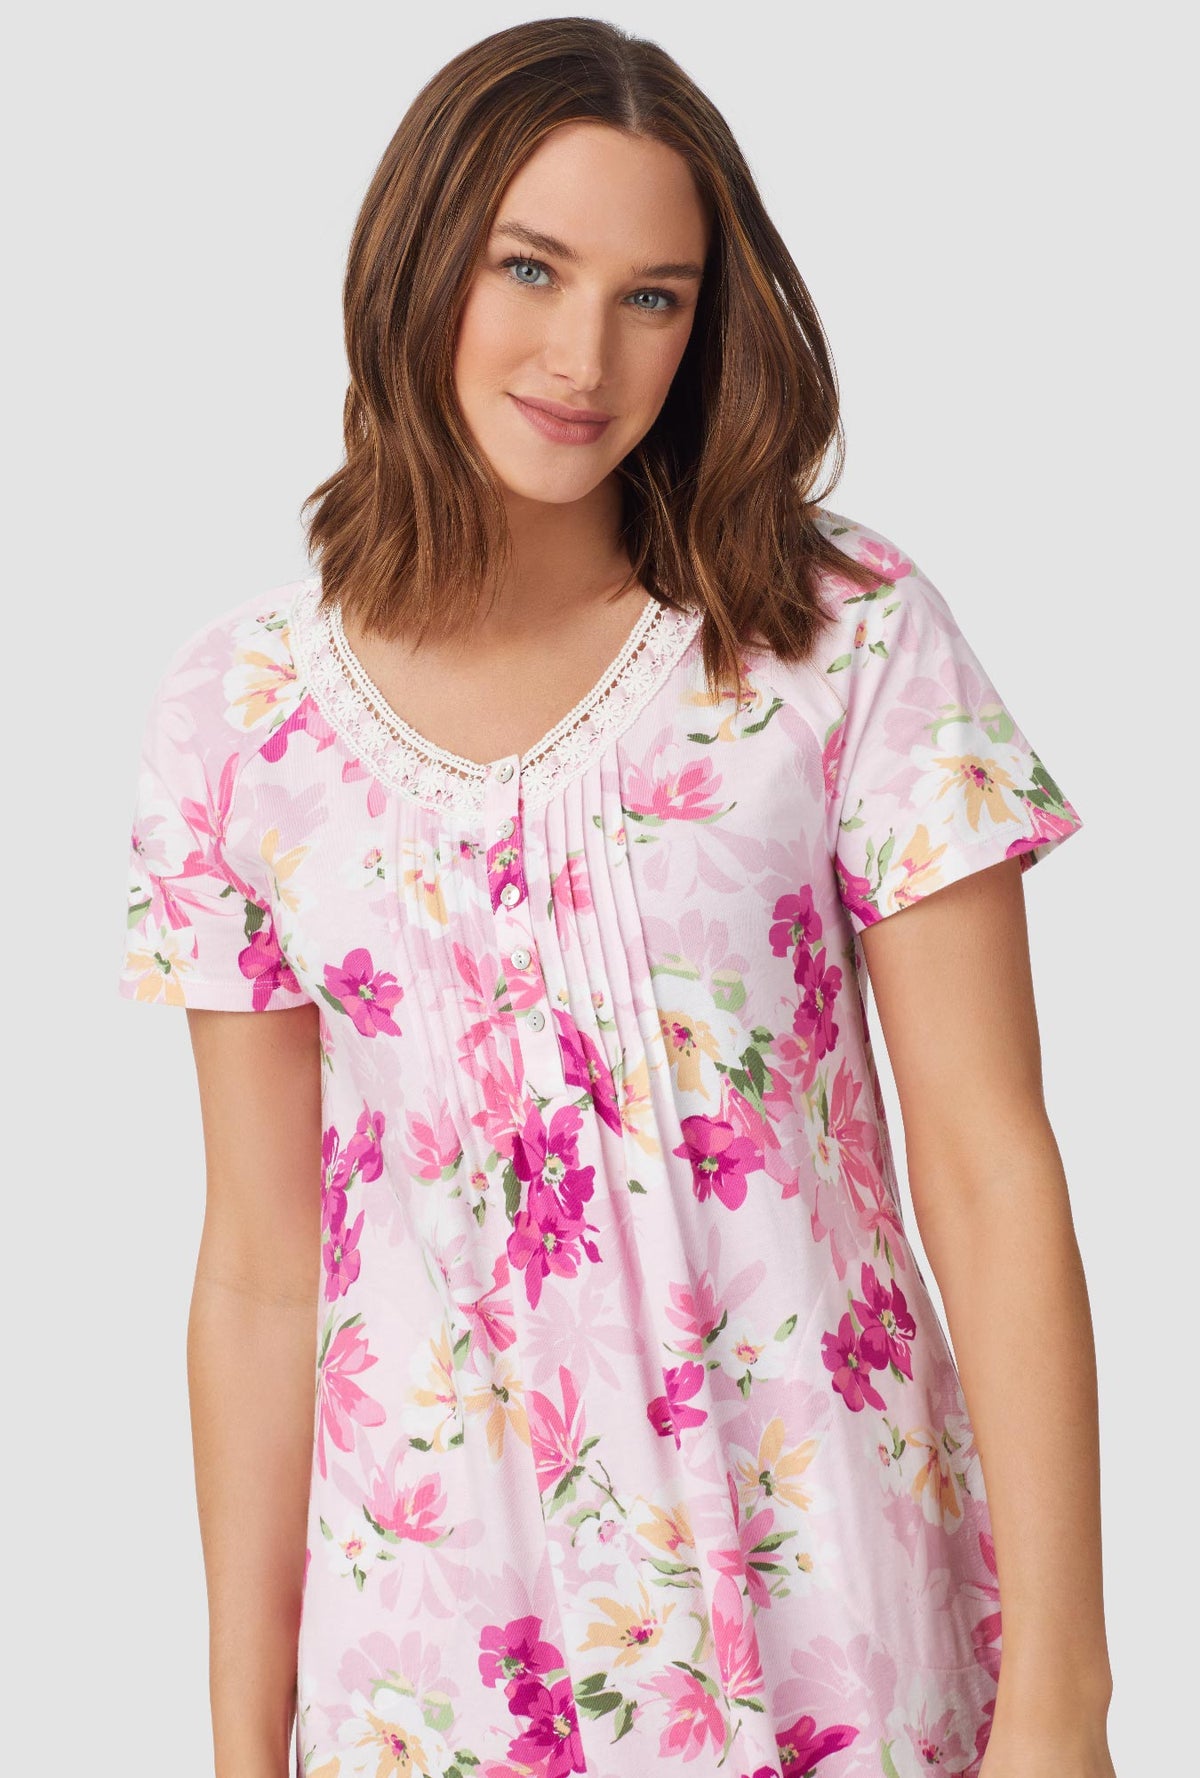 White and Magenta Floral Short Sleeve Nightshirt